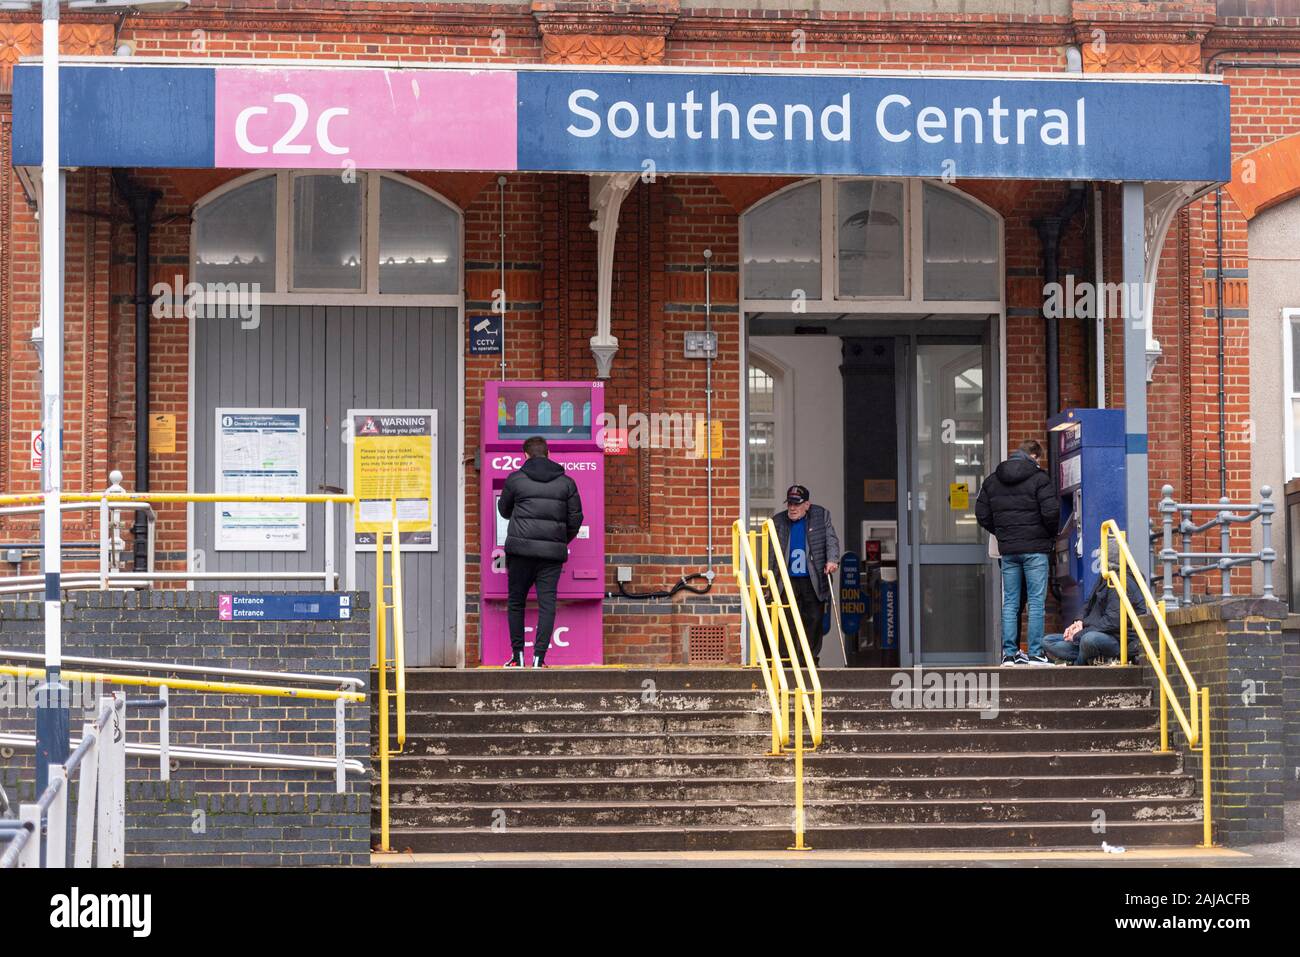 New ticket machine outside Trenitalia C2C Southend Central railway station in Southend on Sea, Essex, UK. Passenger using machine. Problematic system Stock Photo